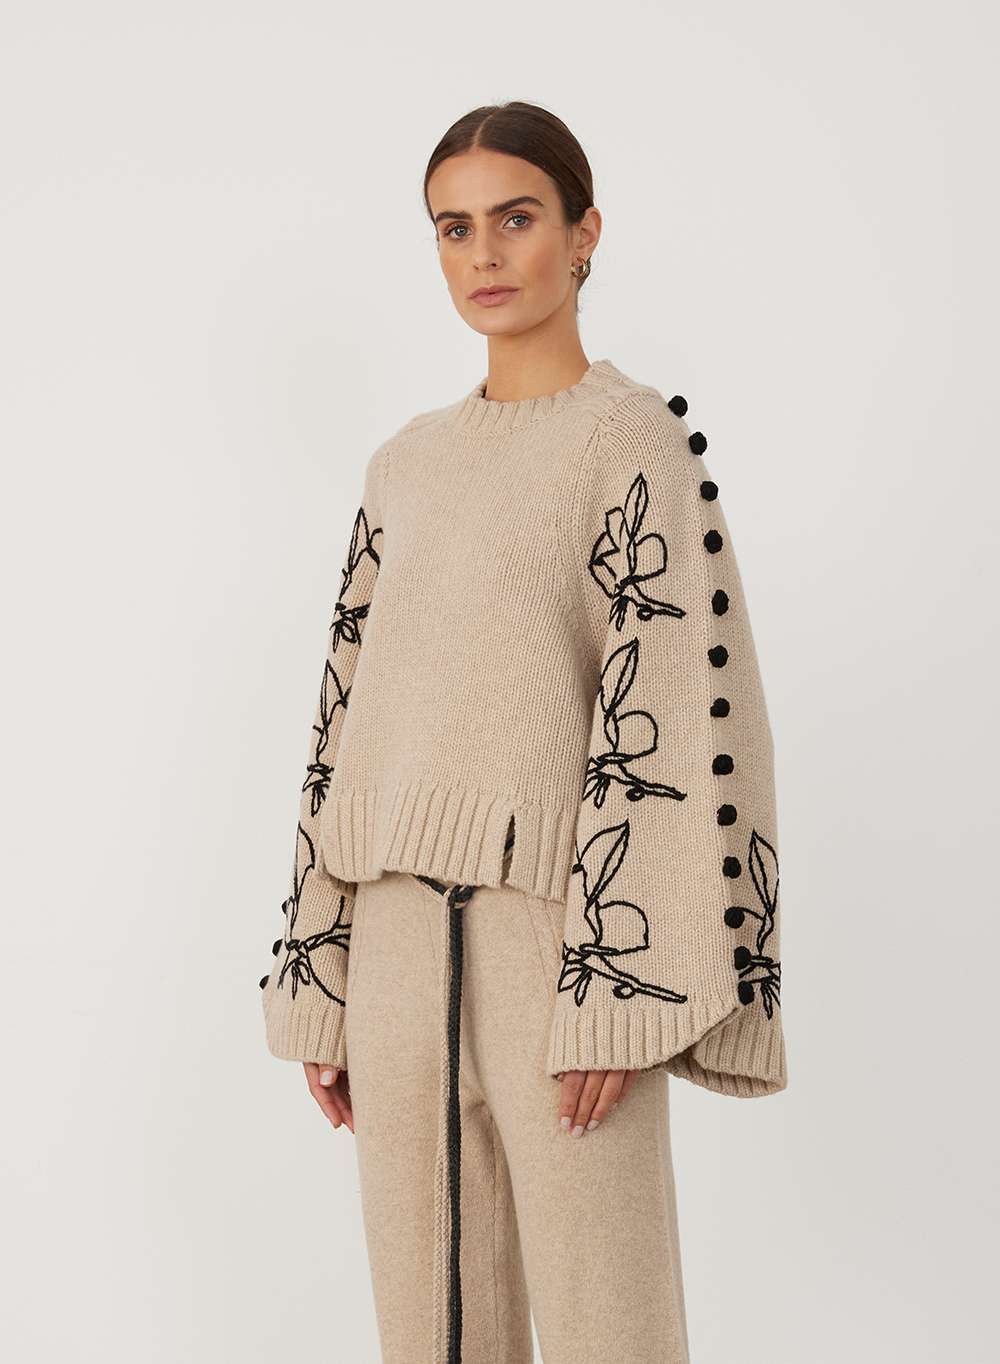 Adele Wool Embroidery Knit